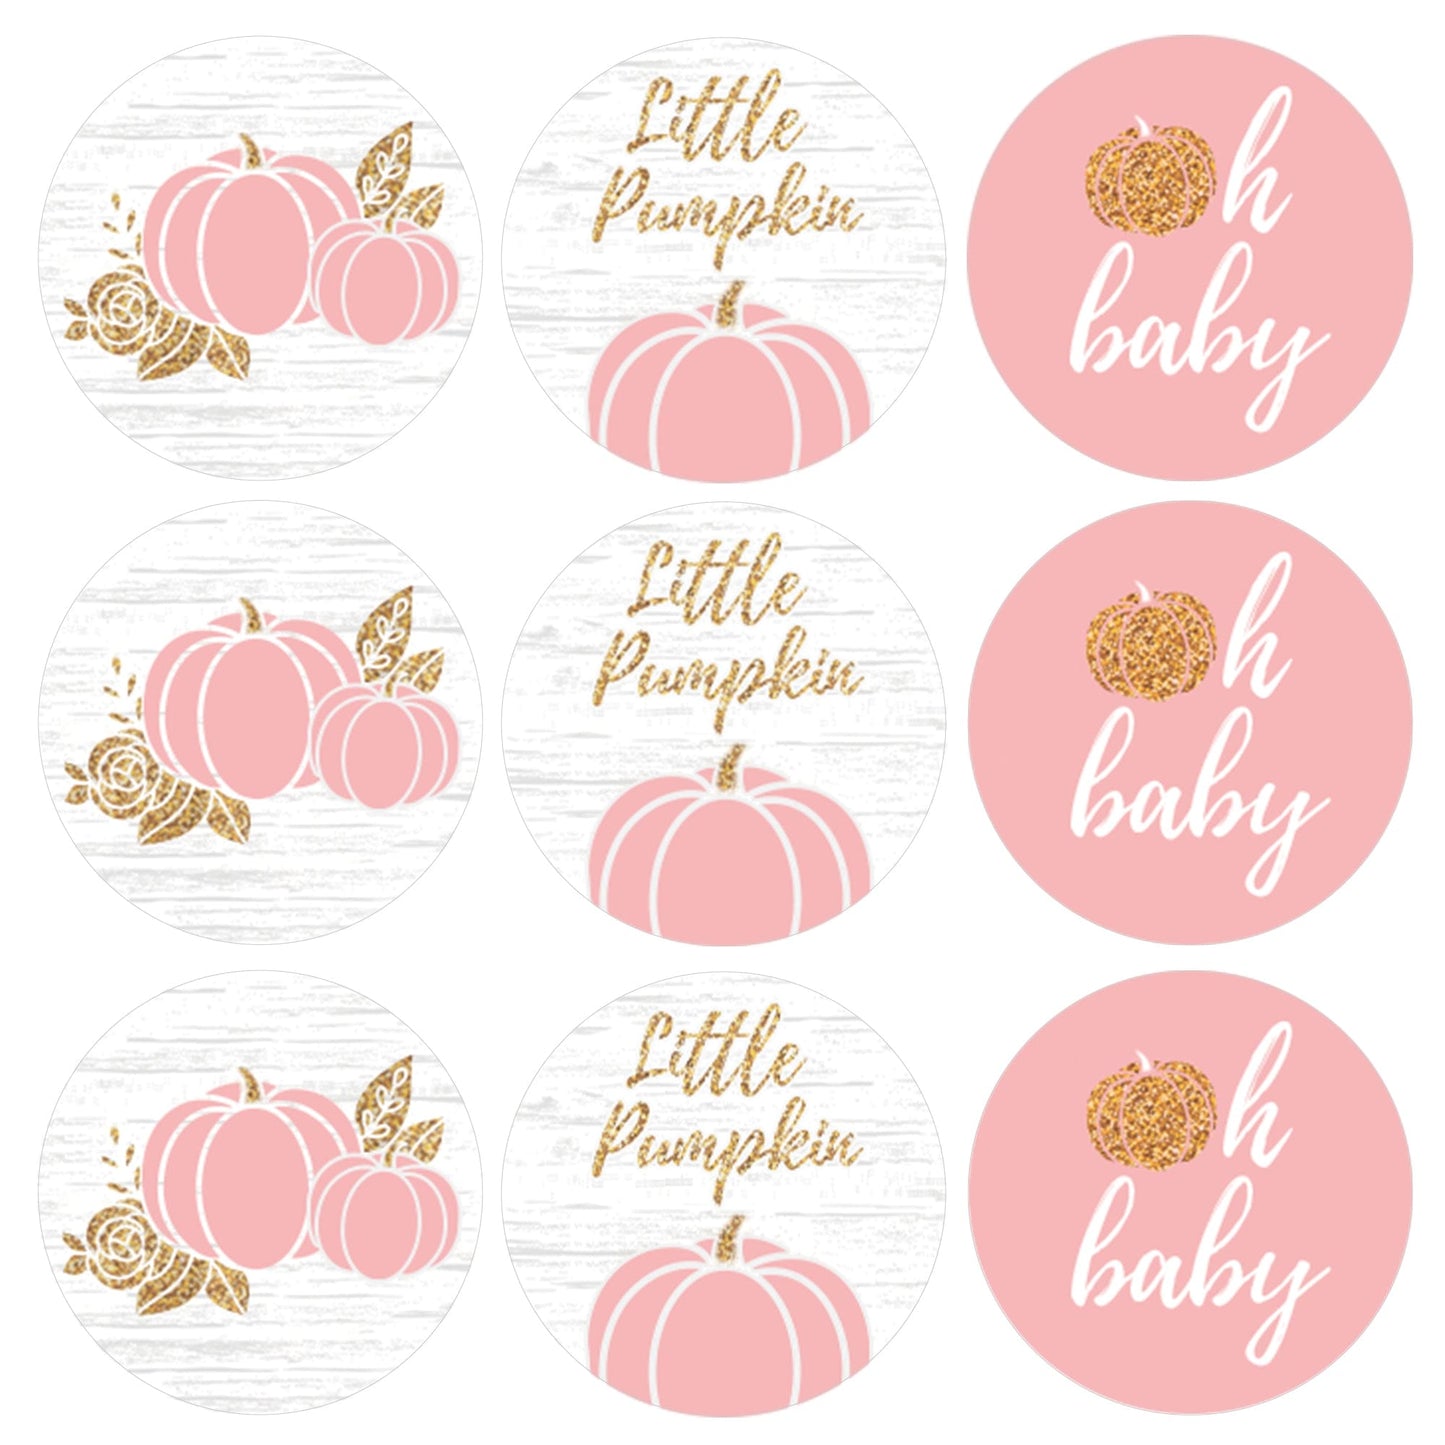 Pink and Gold Little Pumpkin Baby Shower Party Favor Stickers Girl Pumpkin Baby Shower Chocolate Kiss Candy Labels Fall Autumn